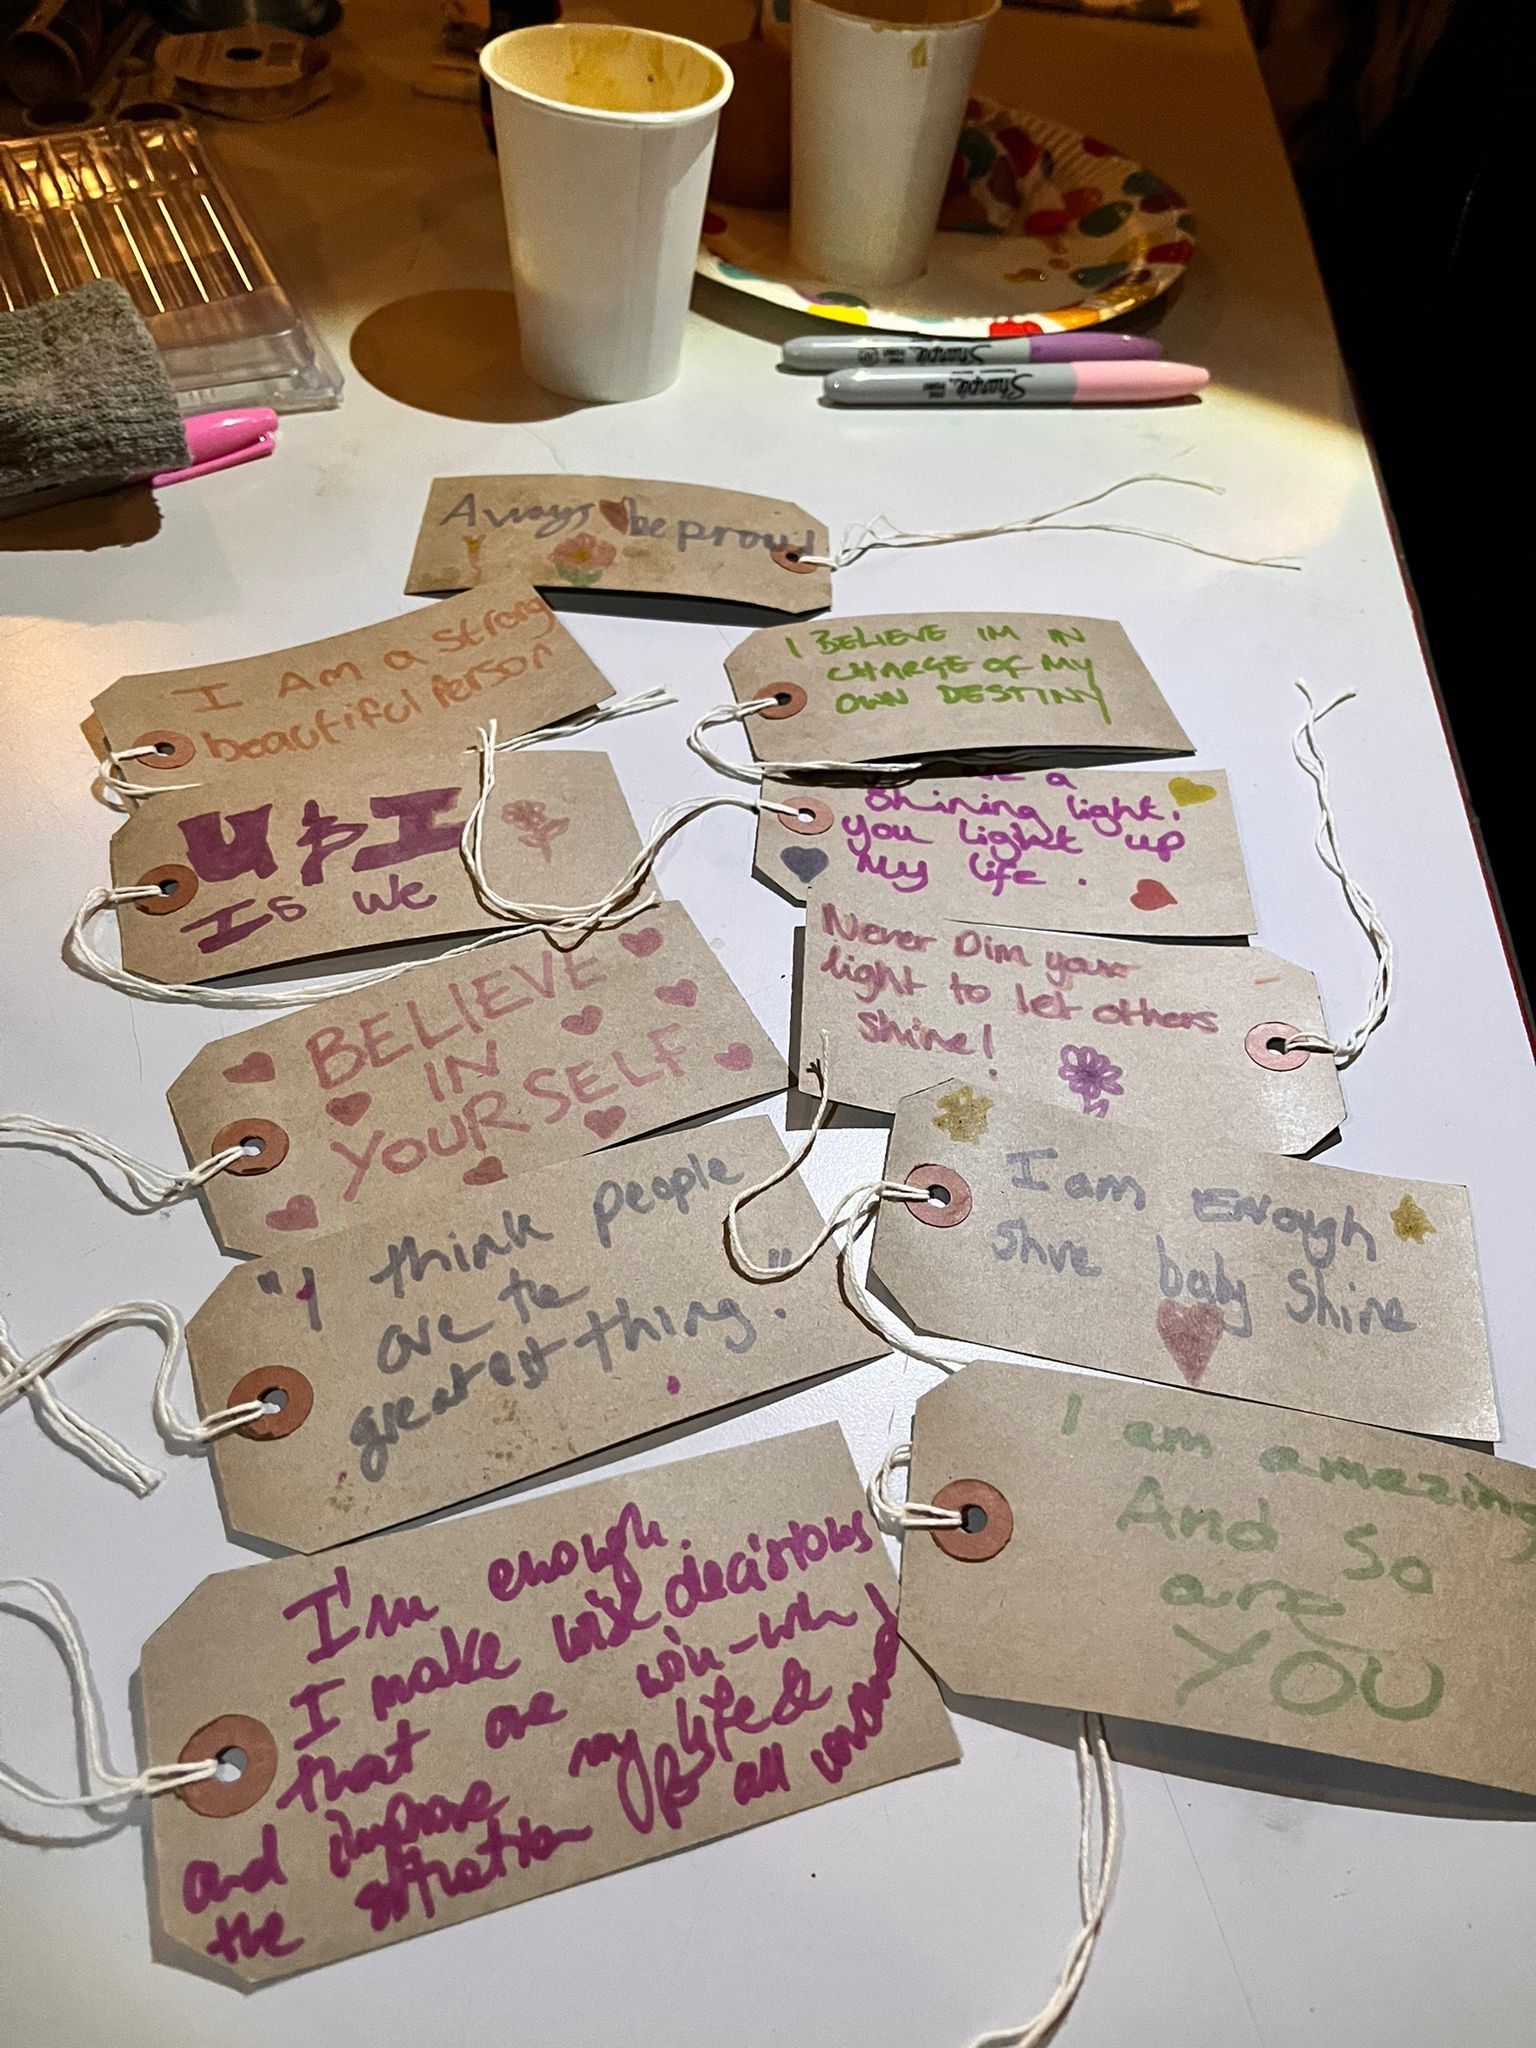 Photo of affirmation cards